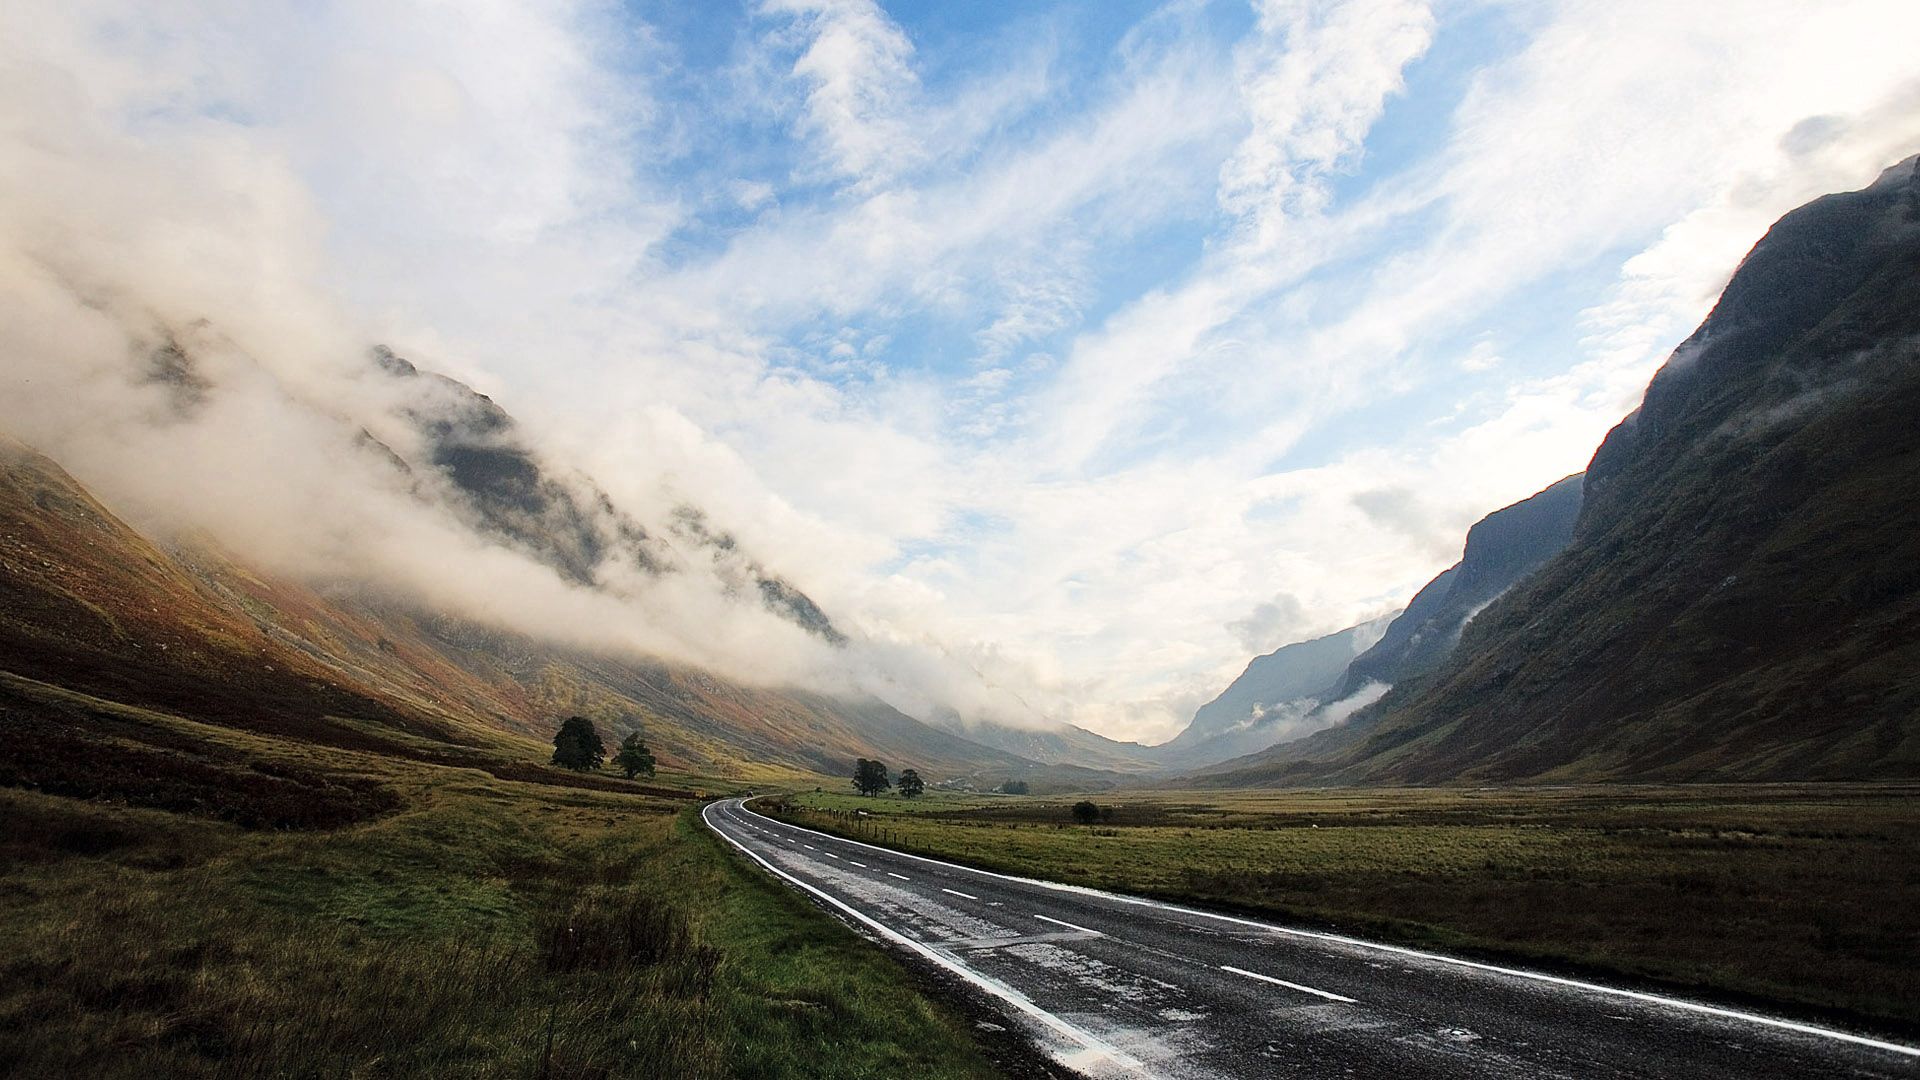 clouds, wet, nature, sky, mountains, road, asphalt, path, haze, valley, way, unknown, obscurity